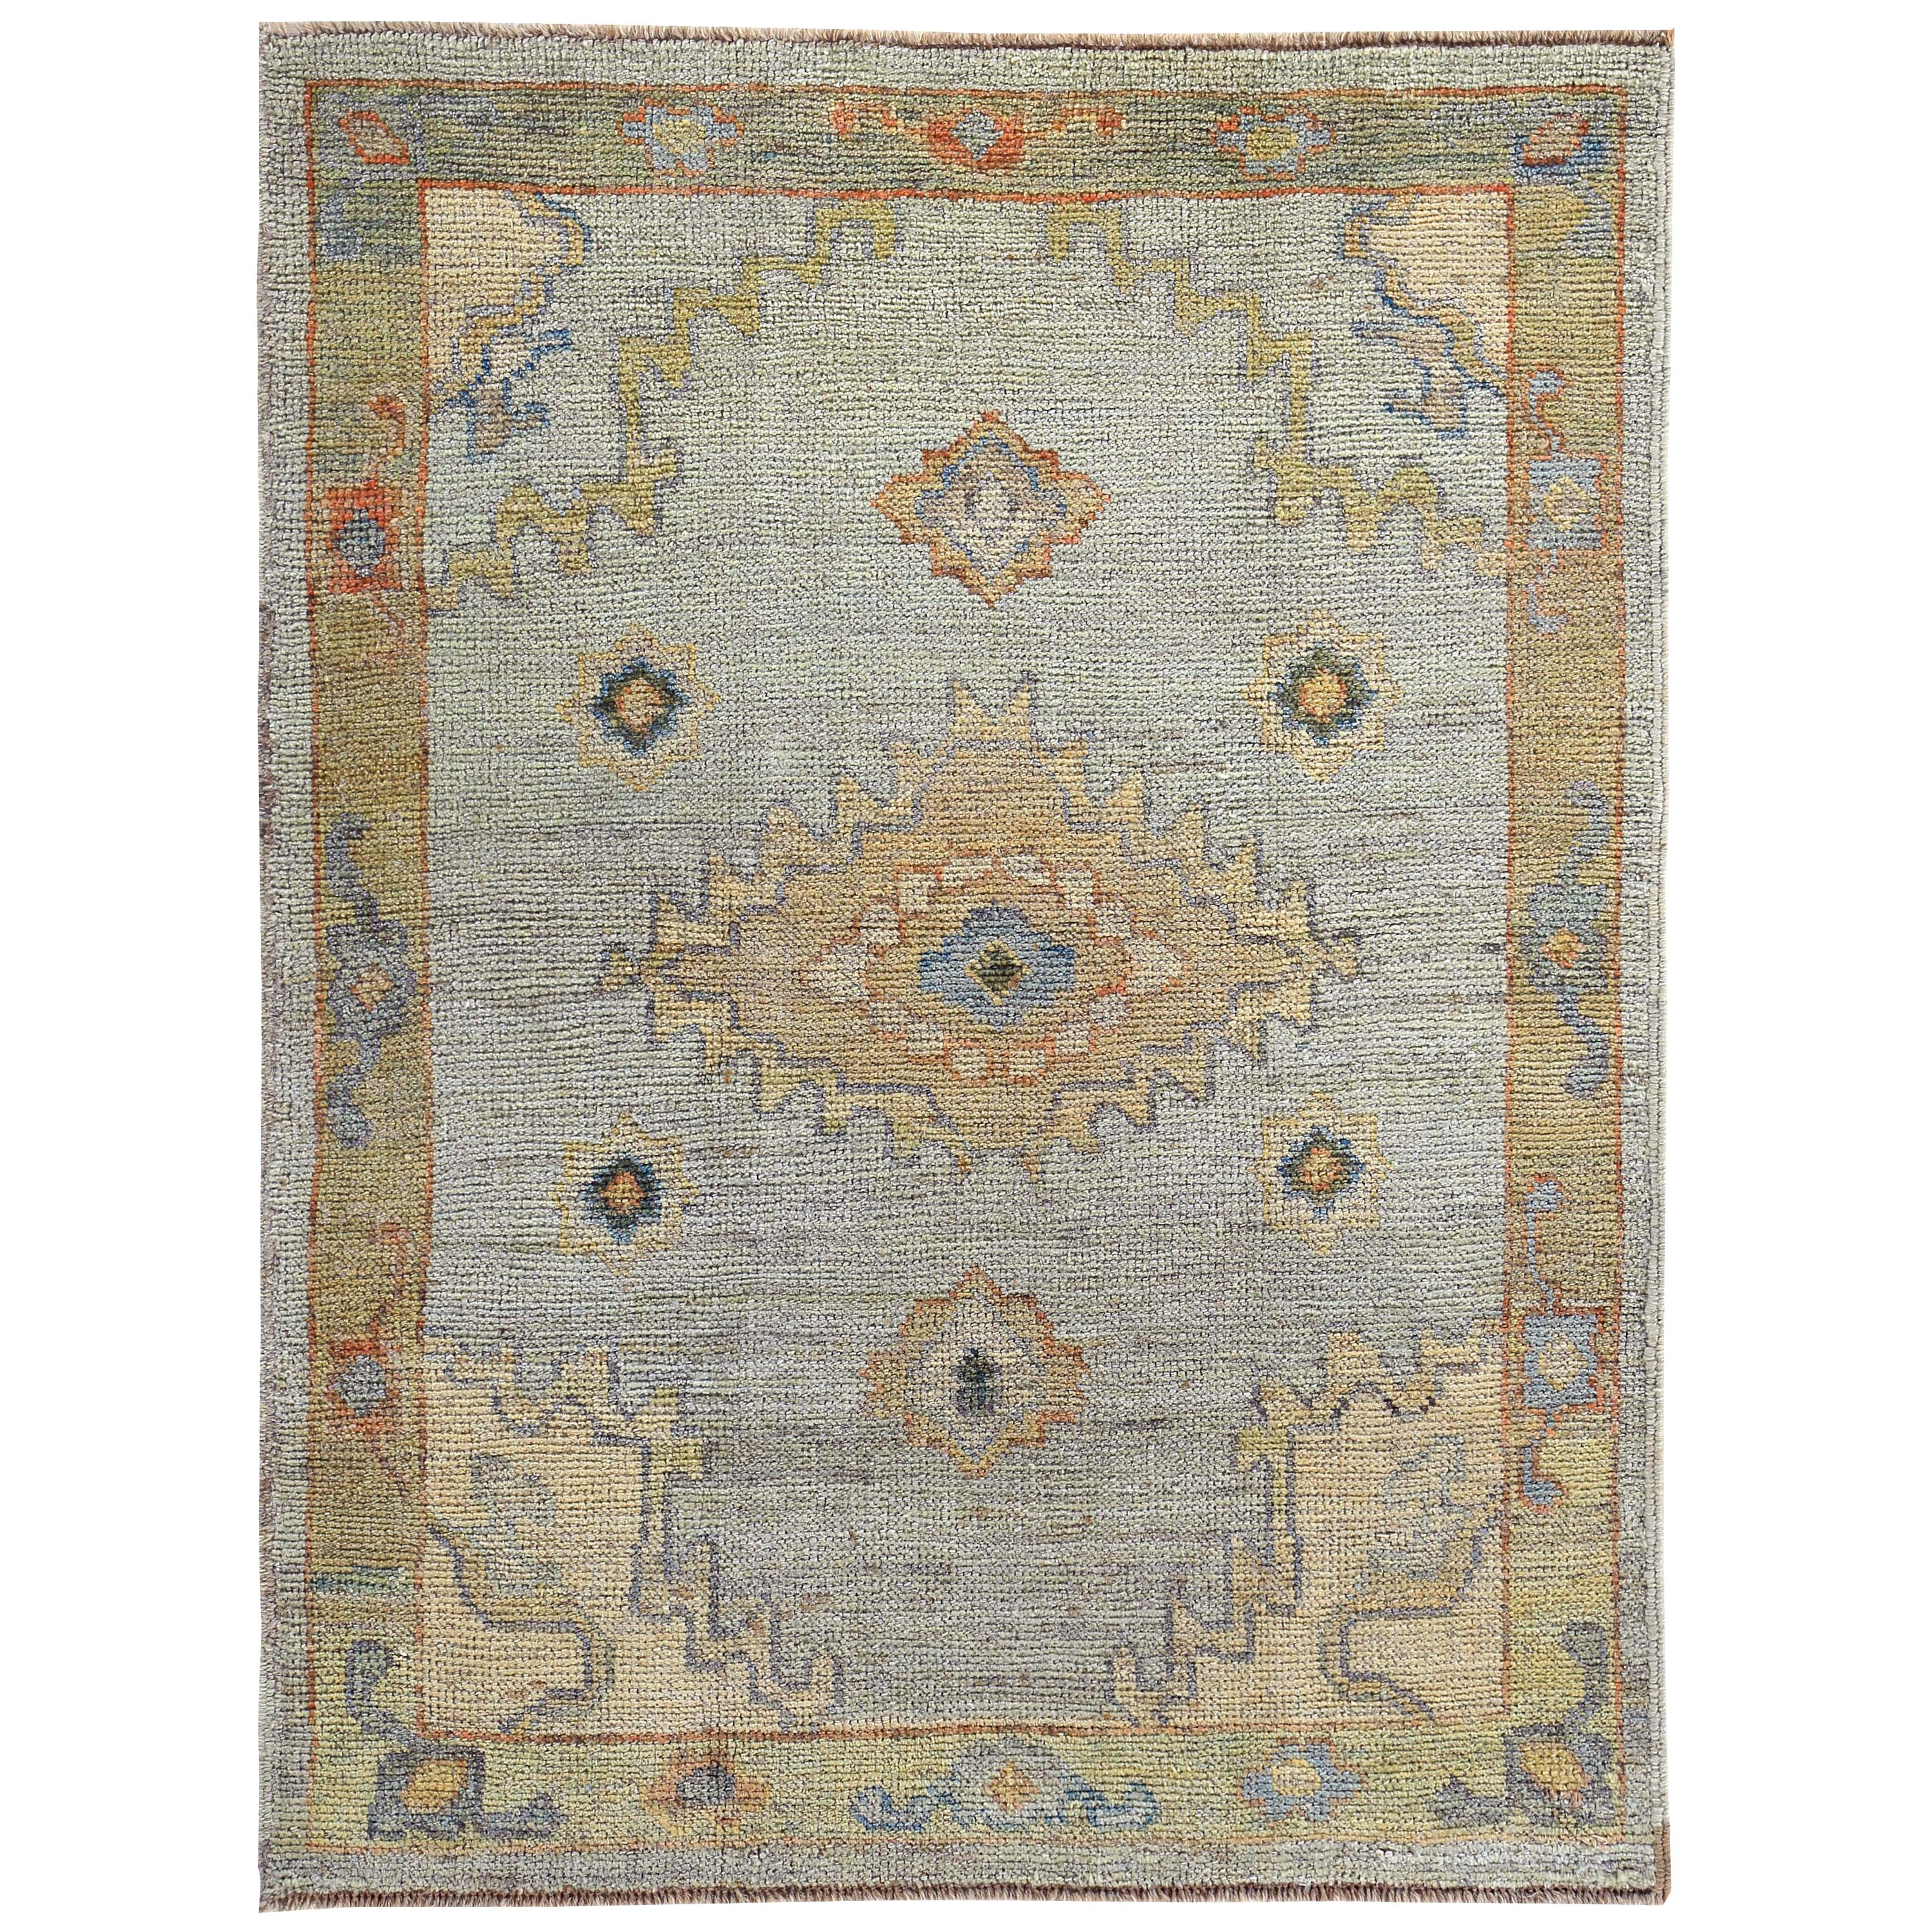 New Turkish Oushak Rug with Yellow, Orange & Green Floral Details on Blue Field